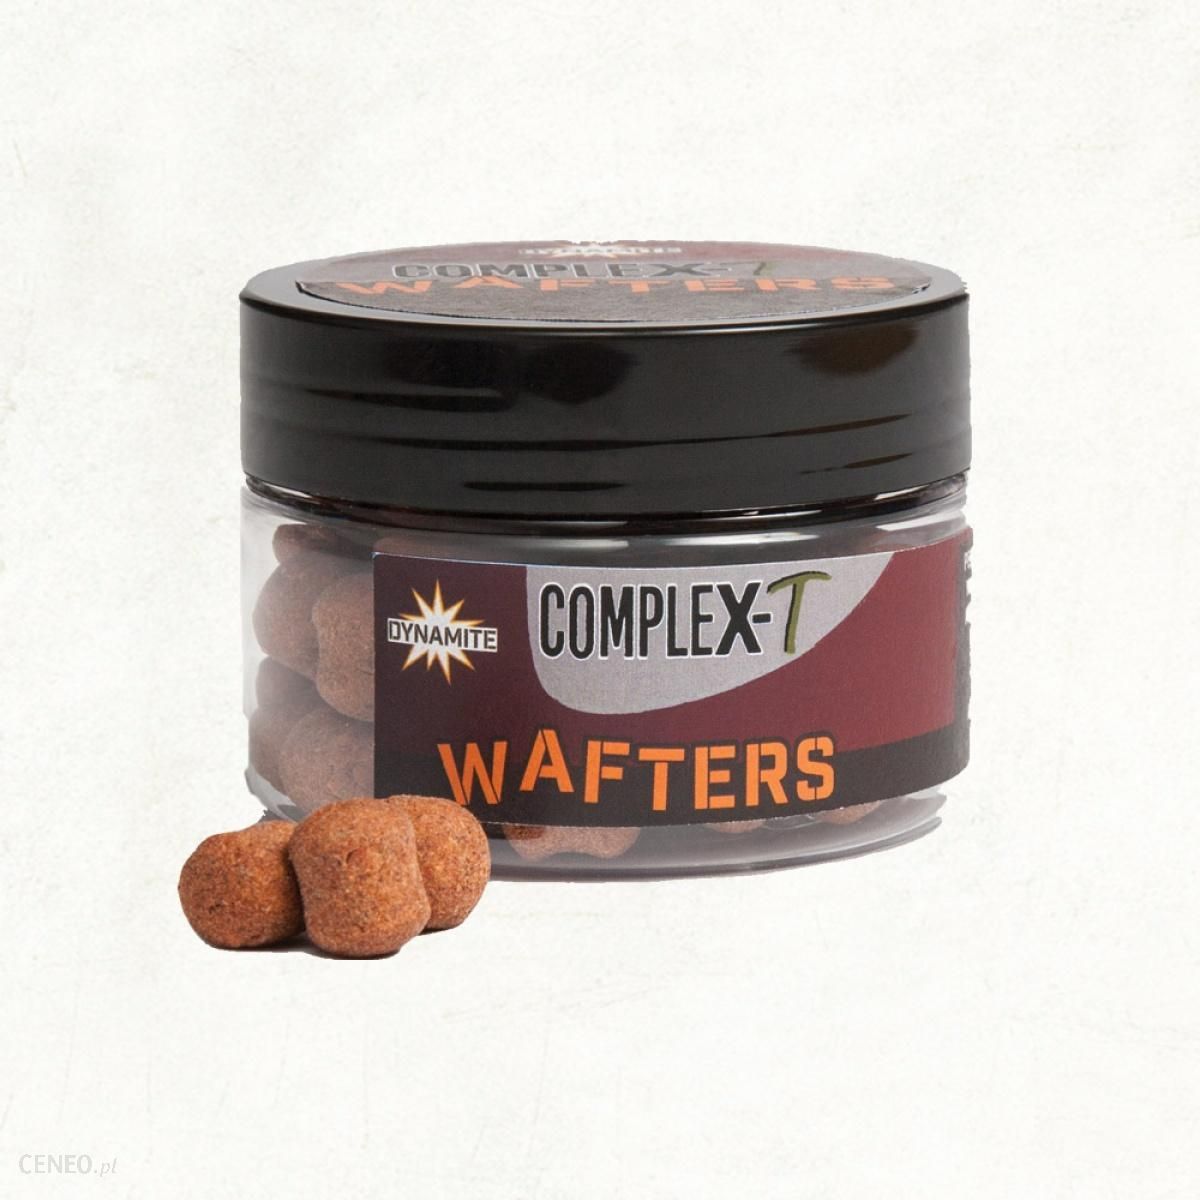 Dynamite Baits Dumbells Wafters Complex-T 18Mm